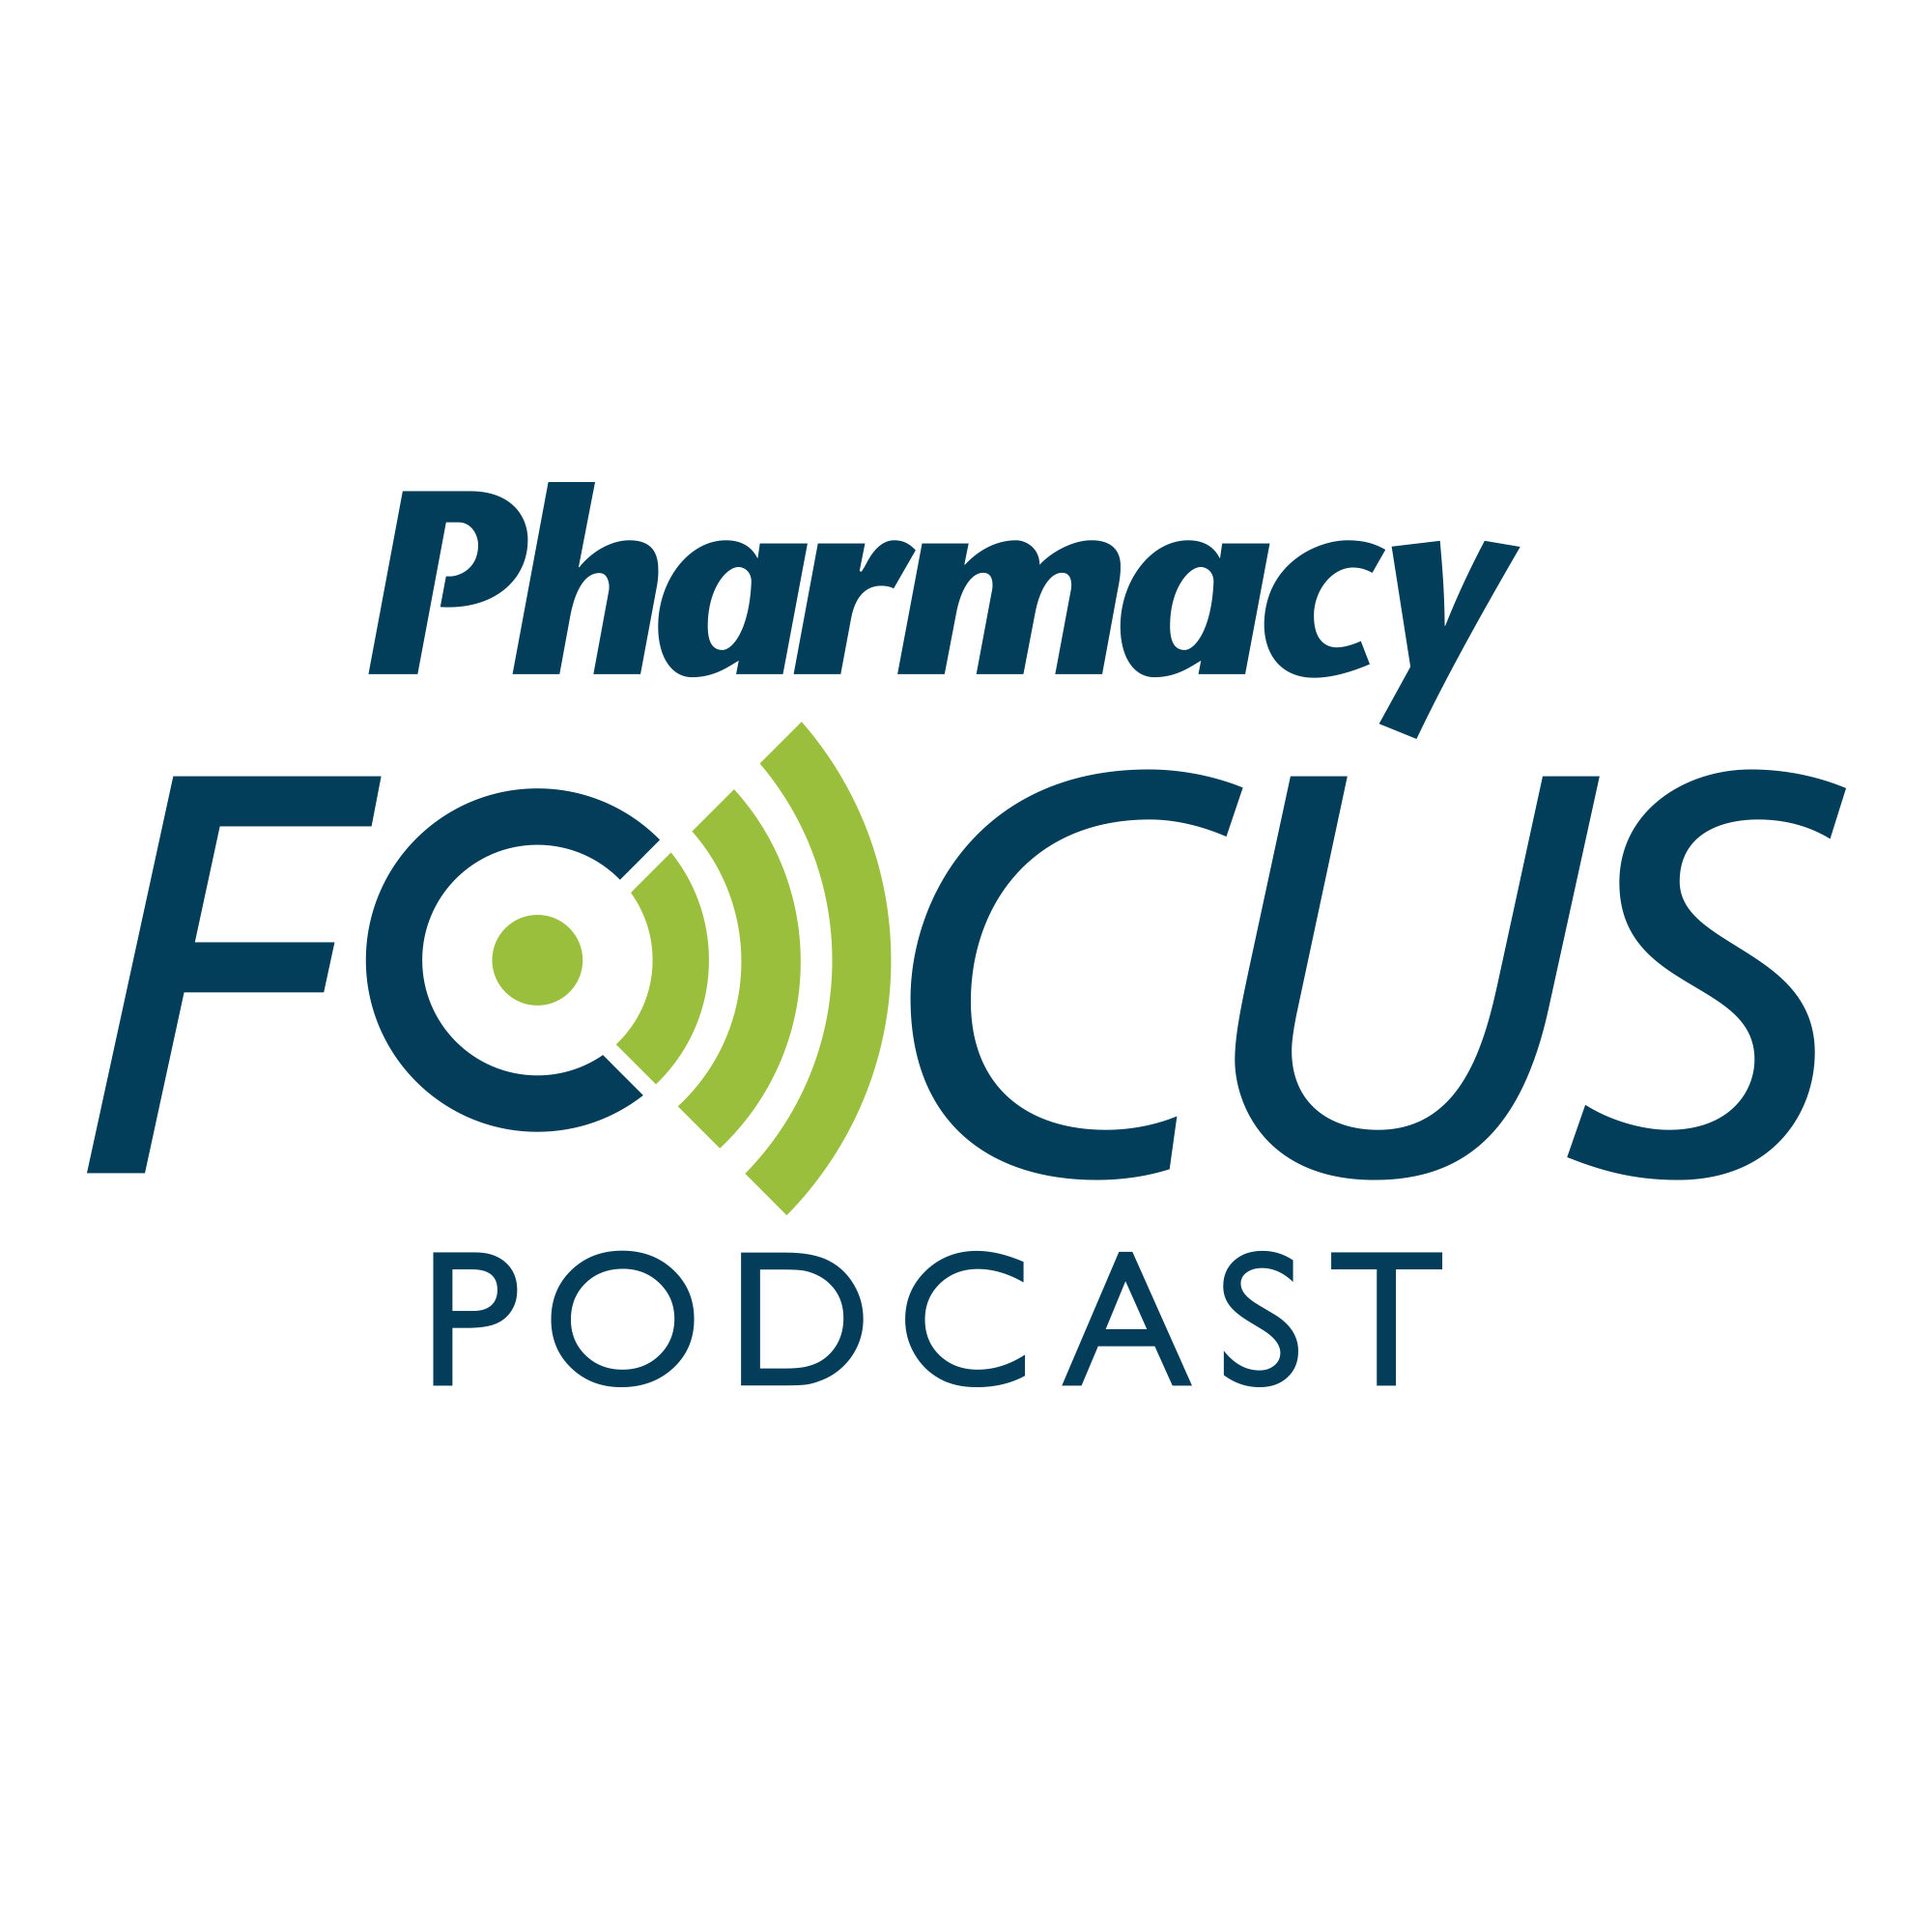 Pharmacy Focus Episode 48: Migraine Treatment and the Emergence of CGRPs